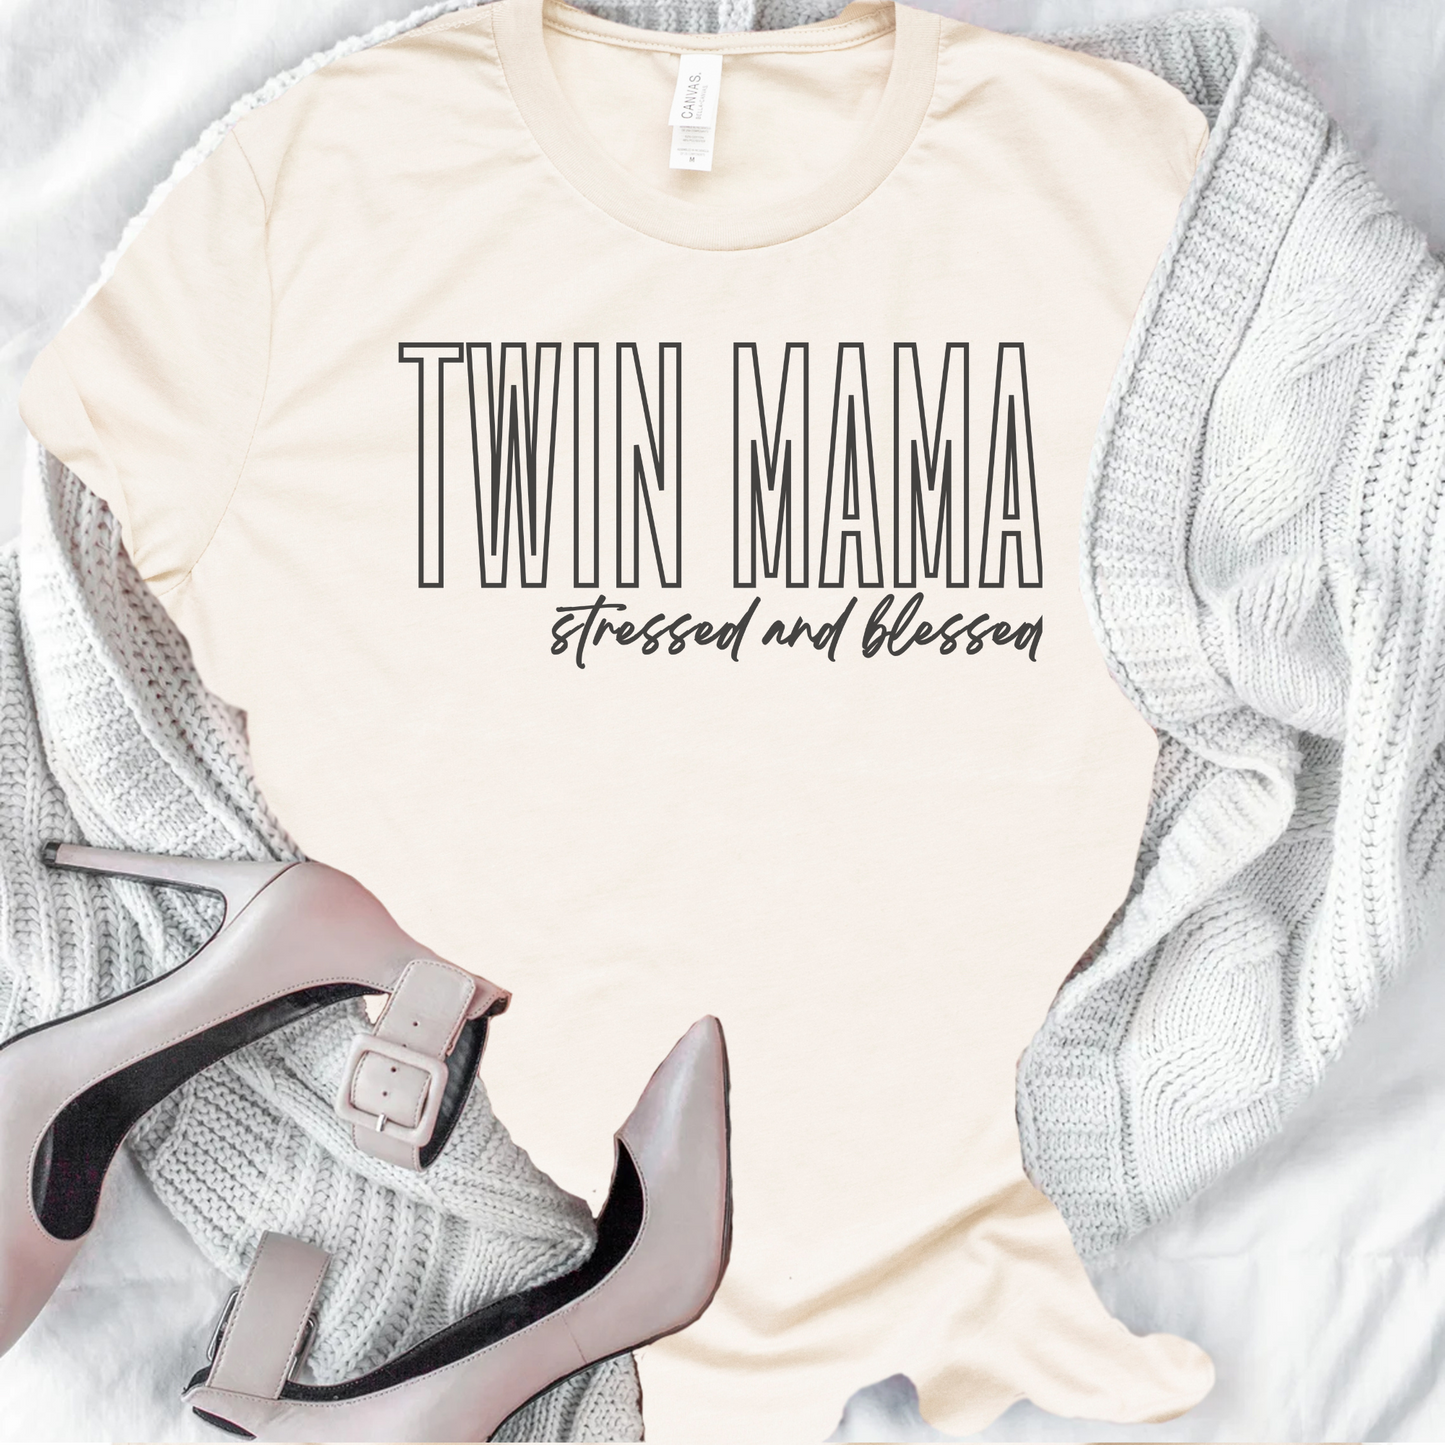 Twin Mama Stressed and Blessed Black Block Hollow Letters Paint Style Script Unisex Jersey Short Sleeve Tee Small-3XL Mother of Multiples